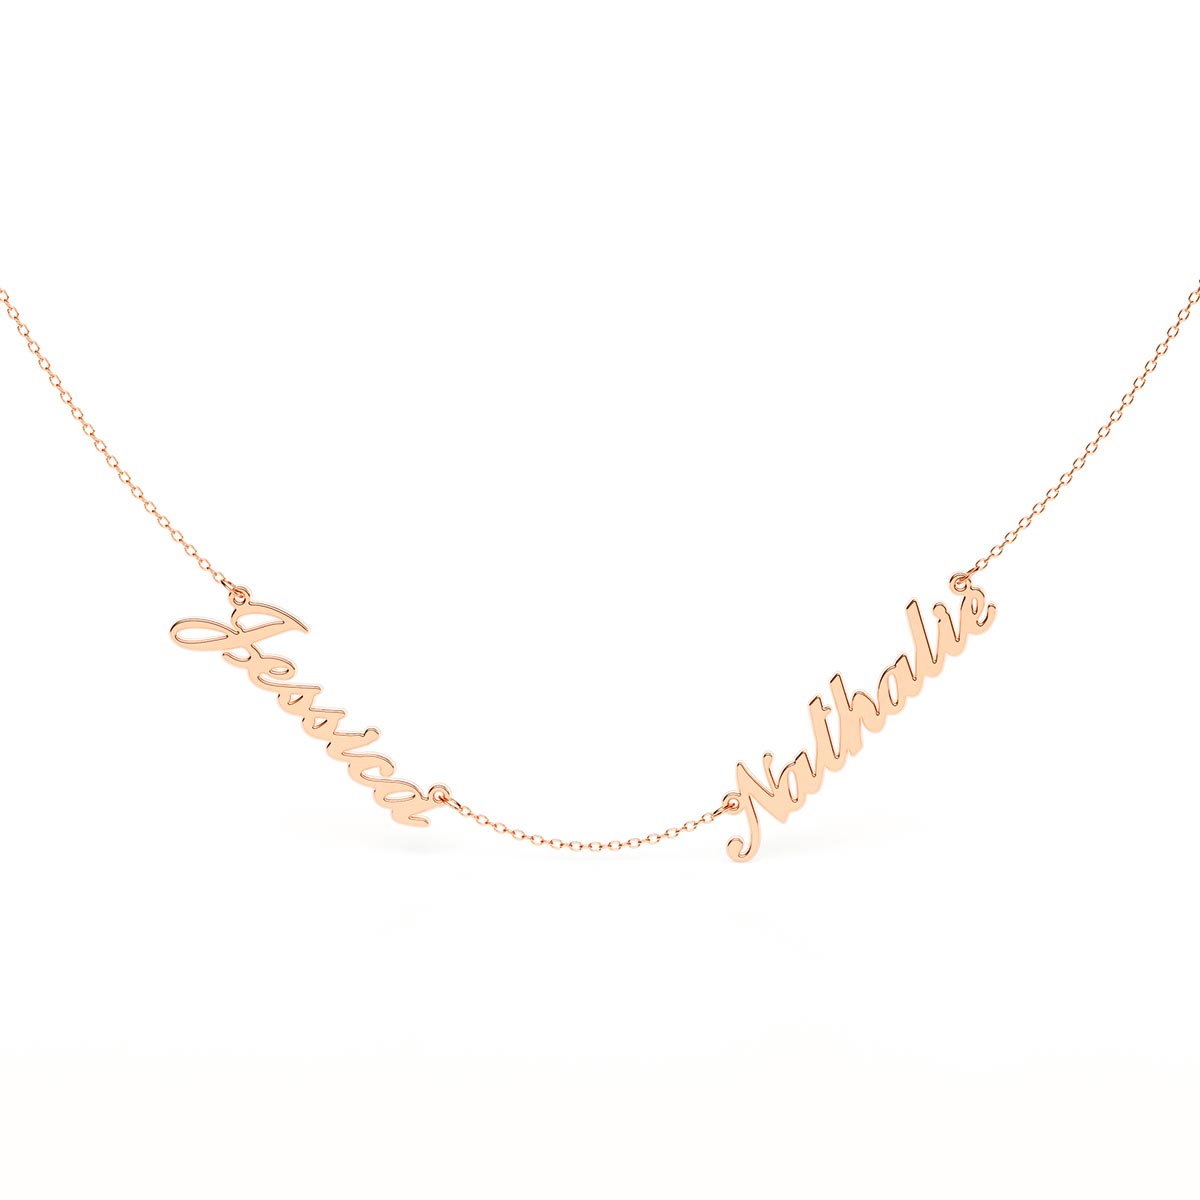 Personalized 2 Name Necklace